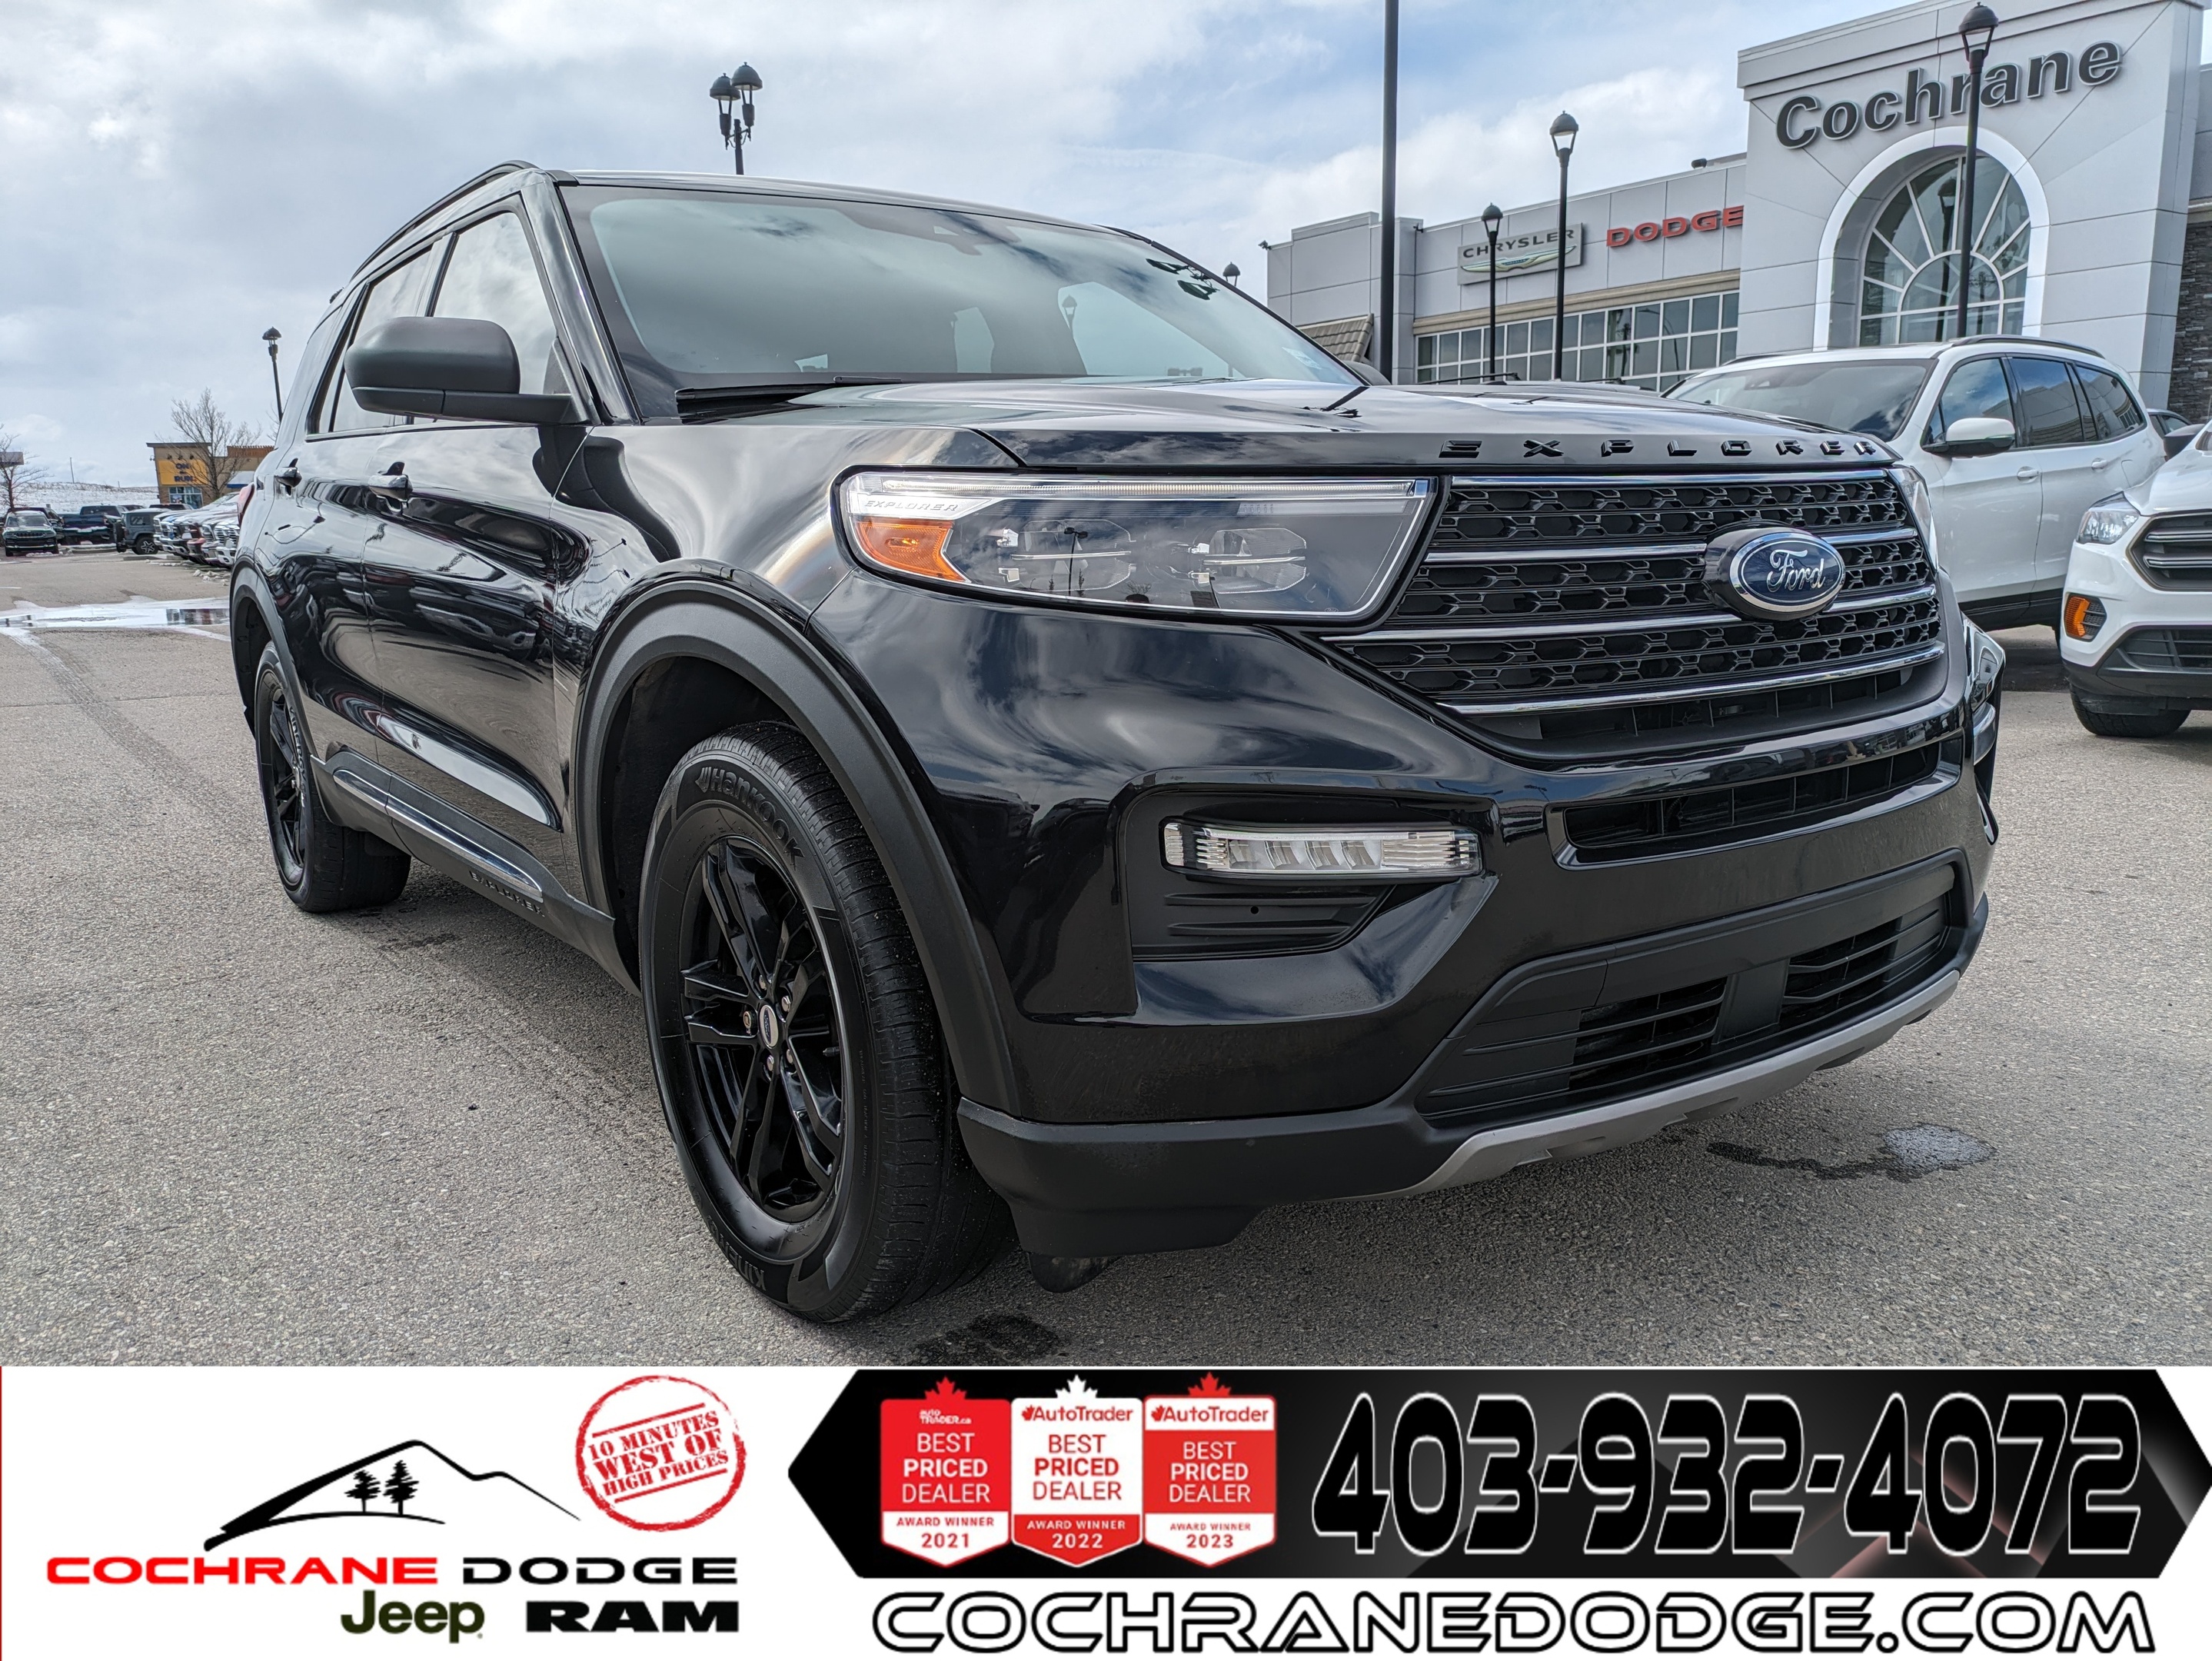 2021 Ford Explorer XLT AWD with 2 sets of tires!